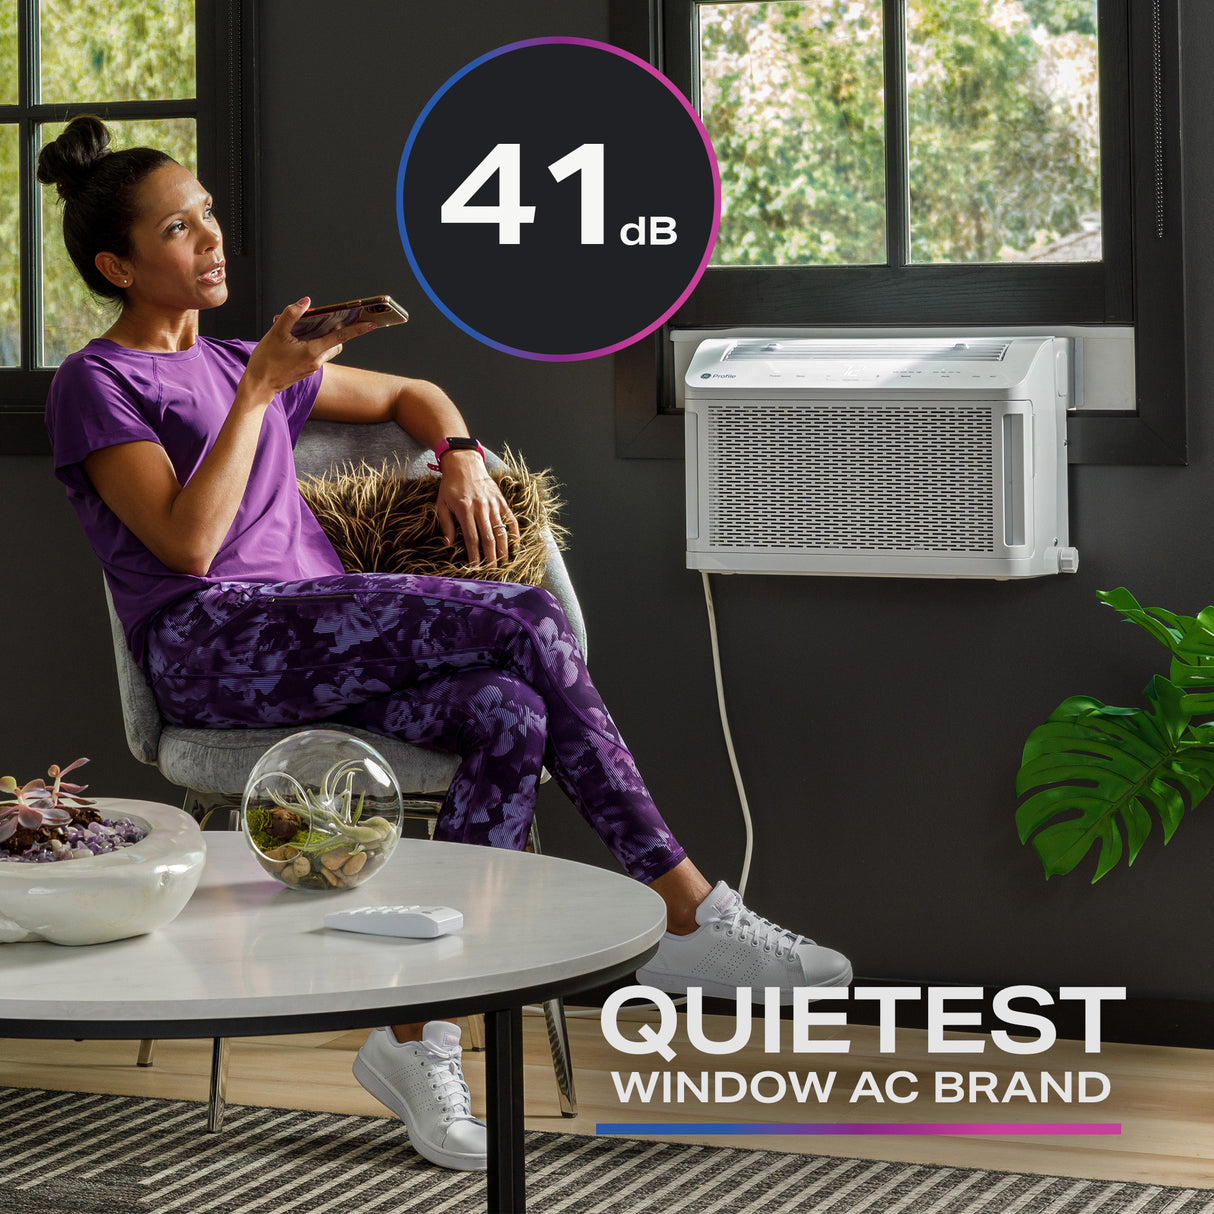 GE Profile ClearView(TM) 8,300 BTU Smart Ultra Quiet Window Air Conditioner for Medium Rooms up to 350 sq. ft. - (AHTT08BC)